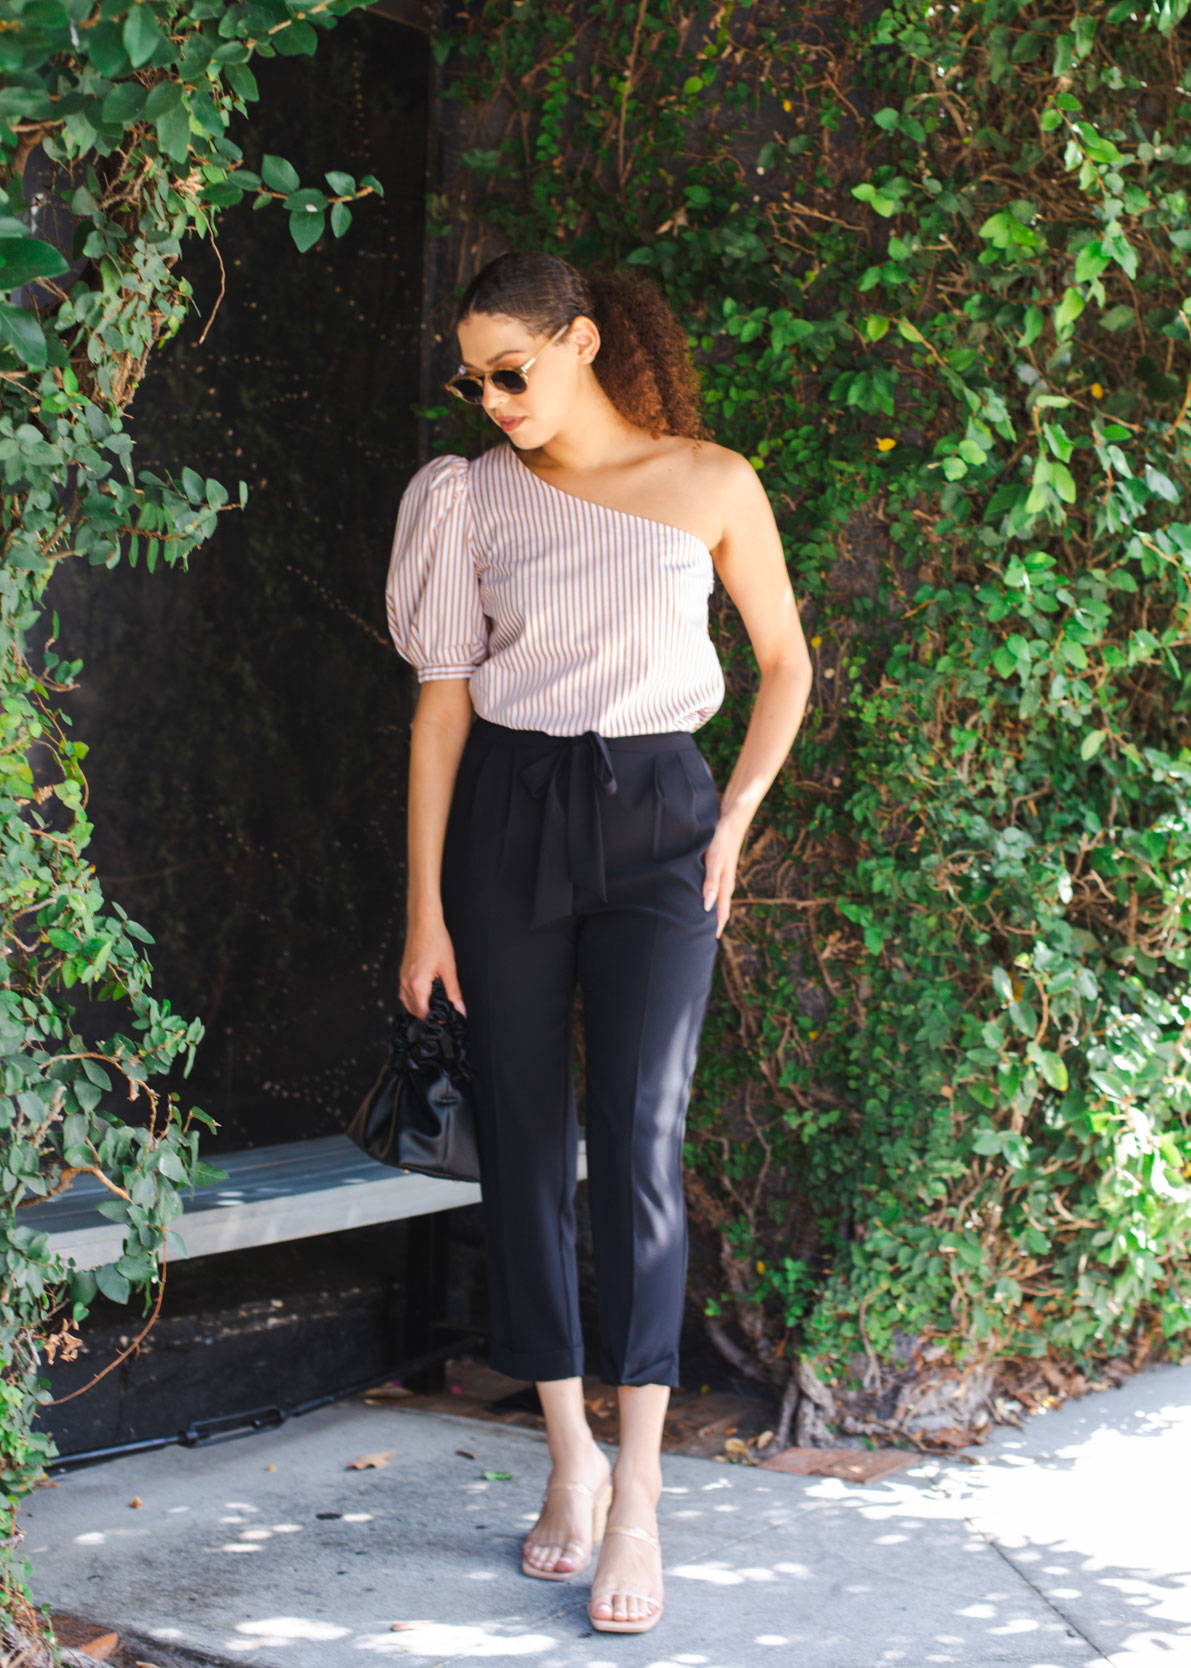 The Ava Top in Cotton – Camilyn Beth